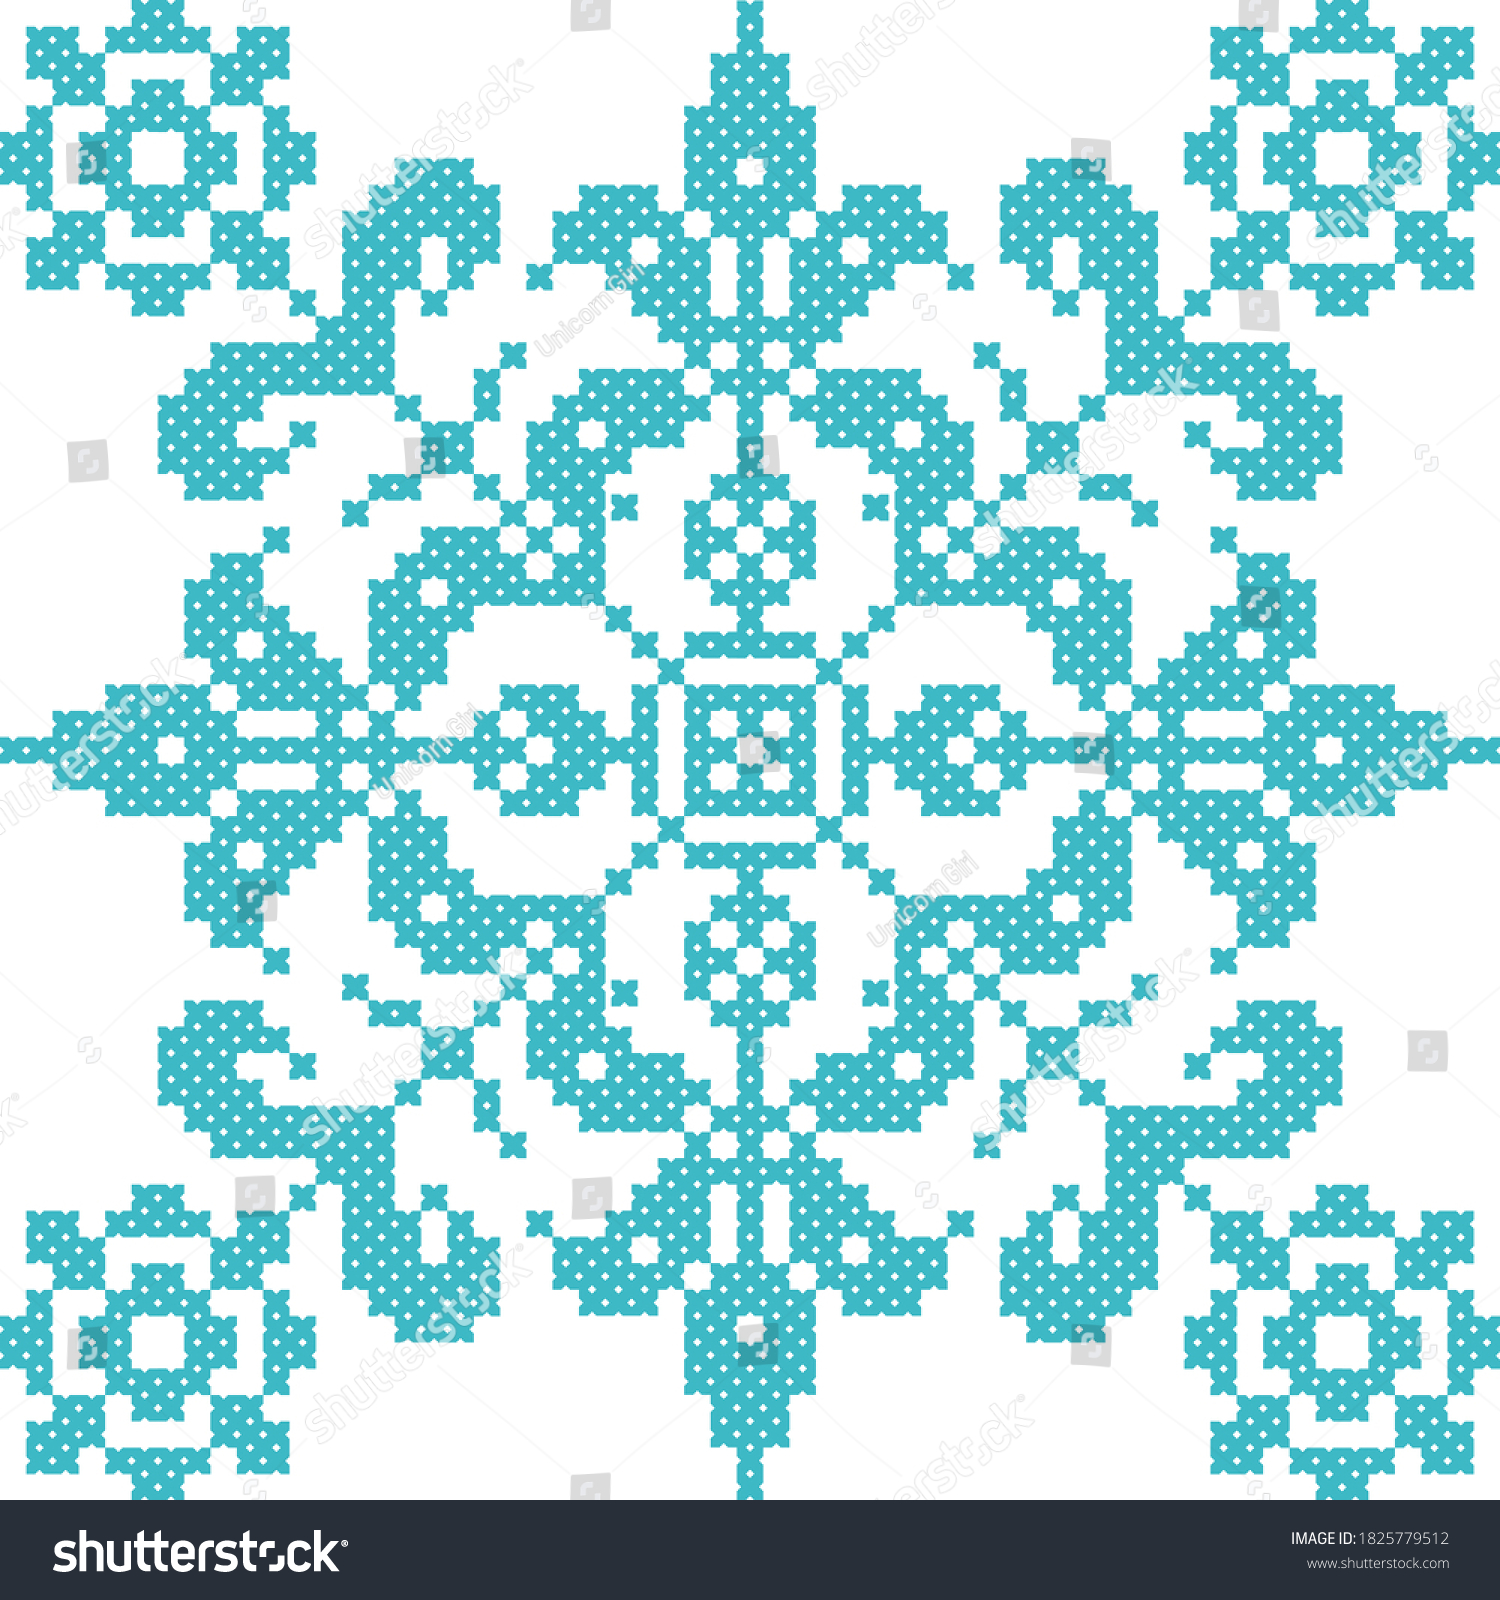 SVG of Scheme for cross-stitch flowers with leaves in blue svg